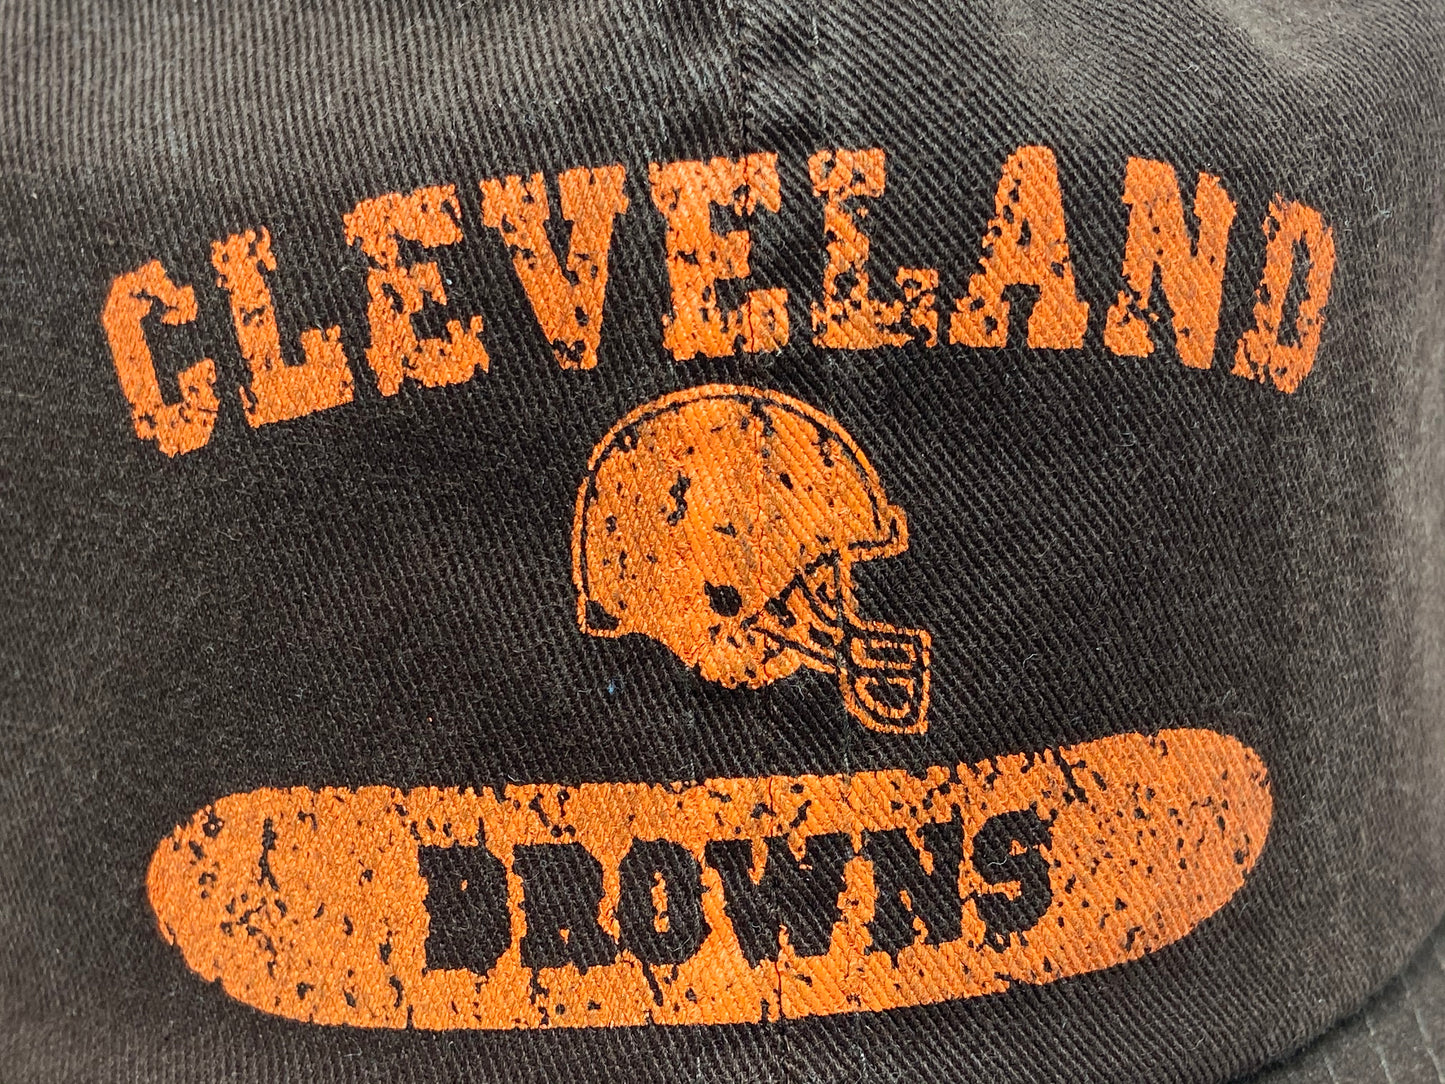 Cleveland Browns Vintage NFL "Aged" Unstructured Brown Cap By American Needle